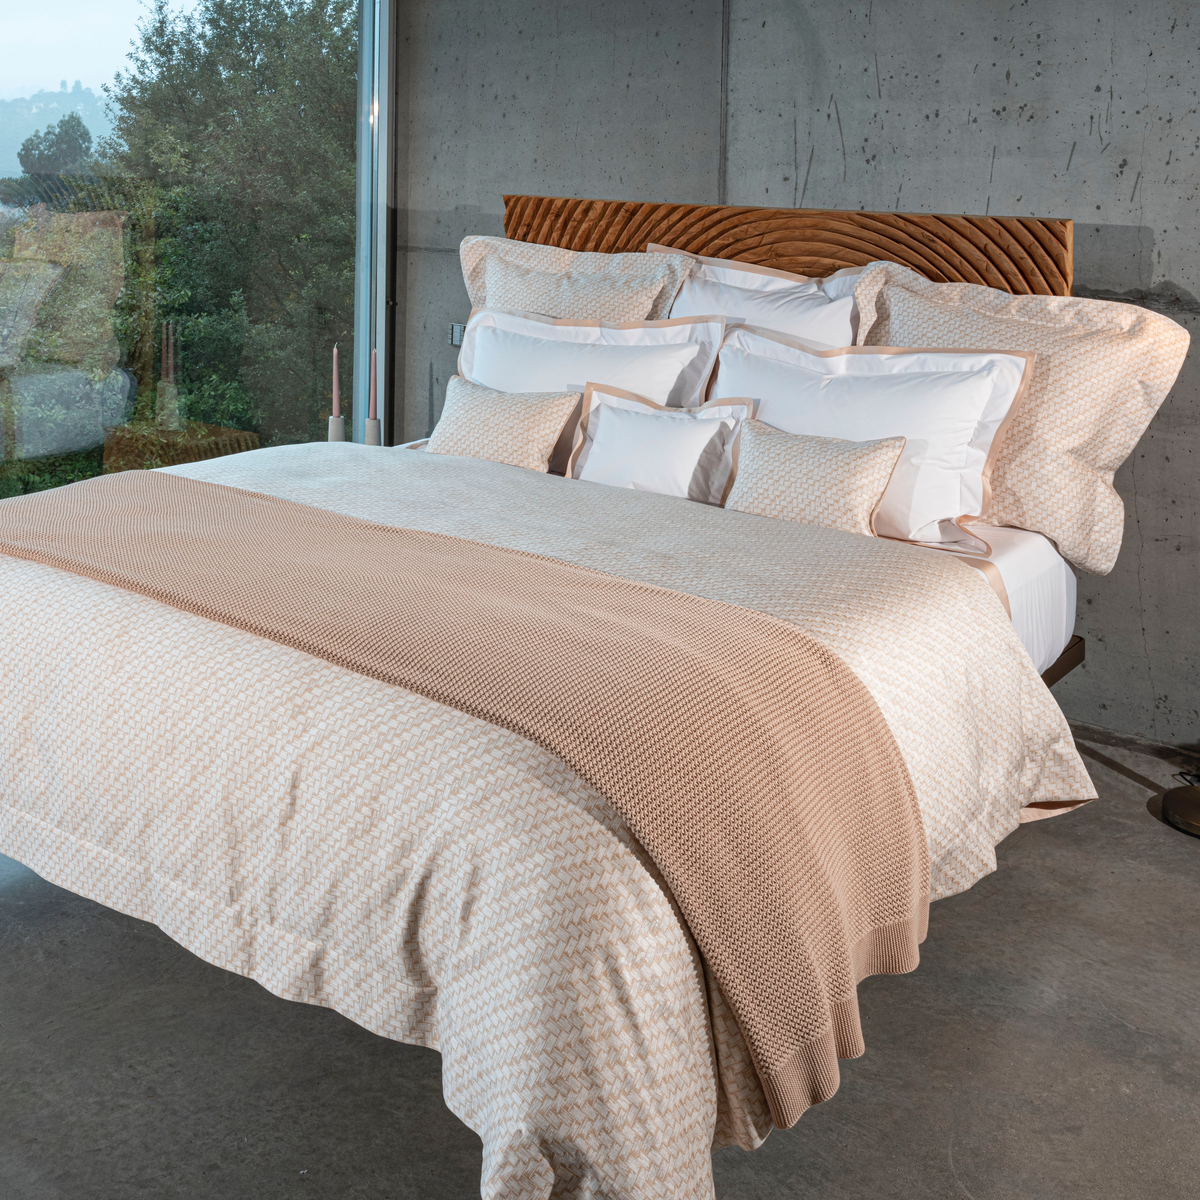 Lifestyle Shot of Full Bed in Celso de Lemos Twined Collection in Powder Color